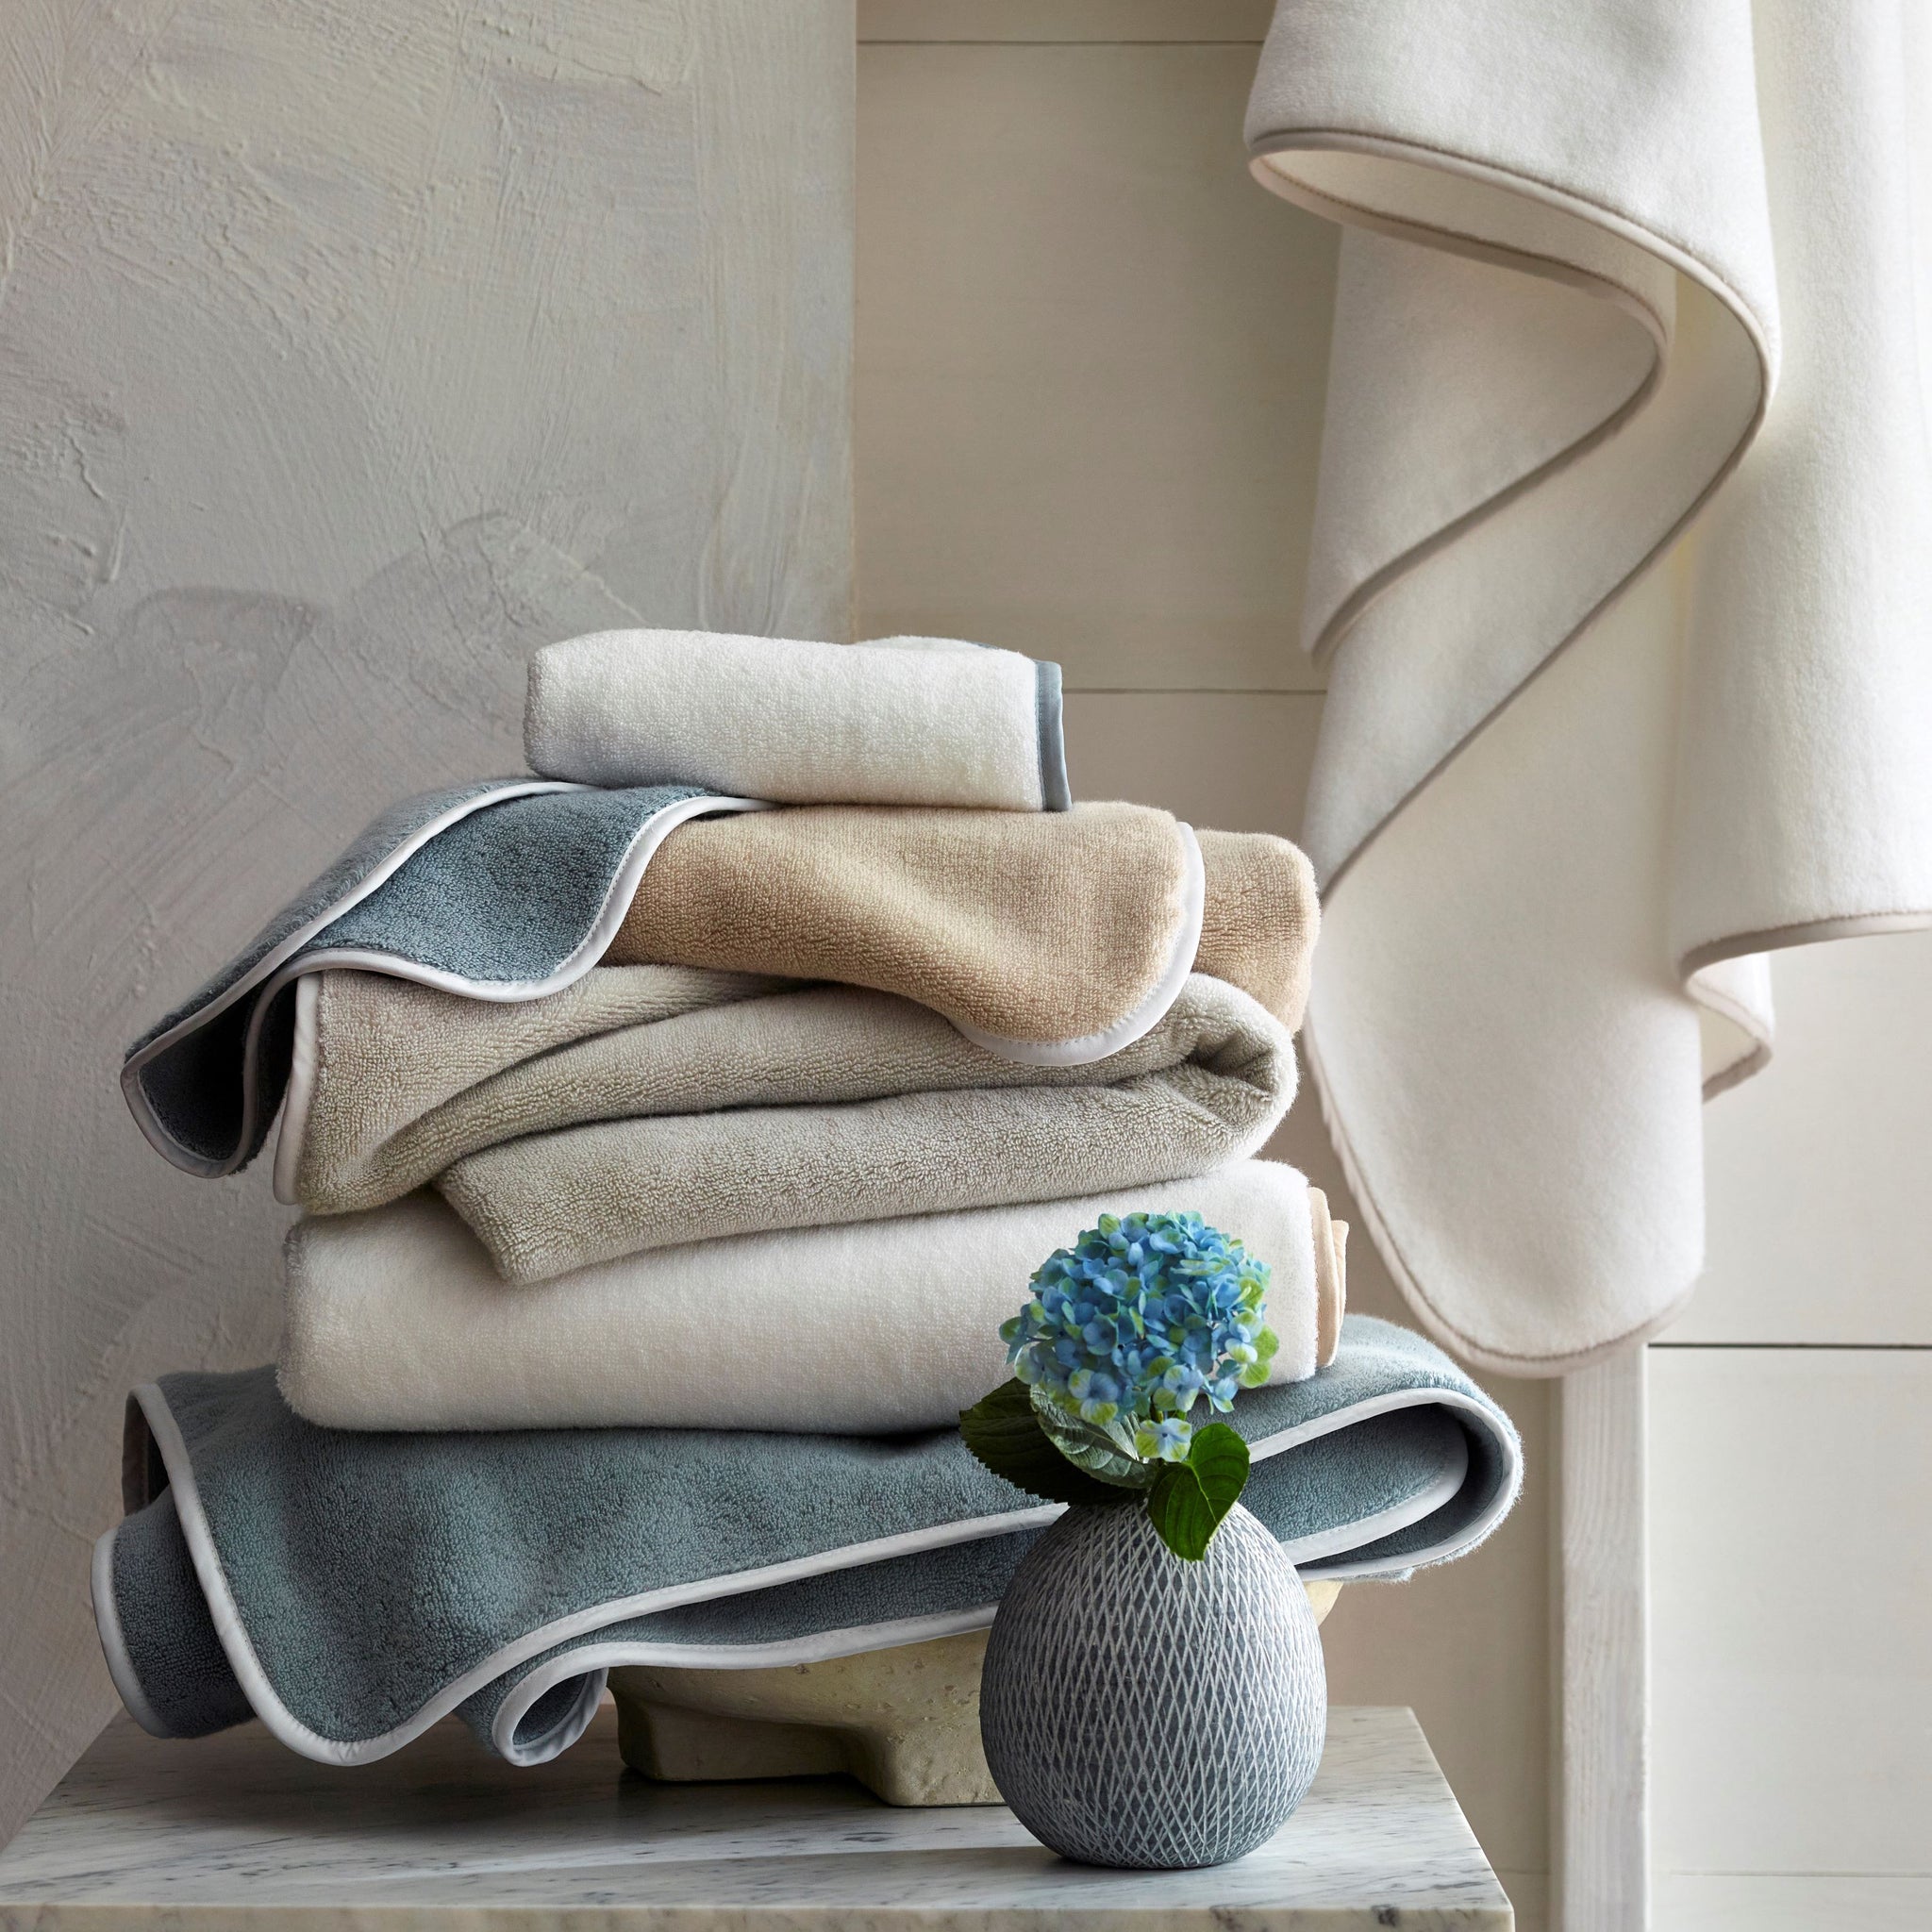 Bodrum Bound Towels by Home Treasures | Handcrafted in the USA with plush and absorbent Turkish terry